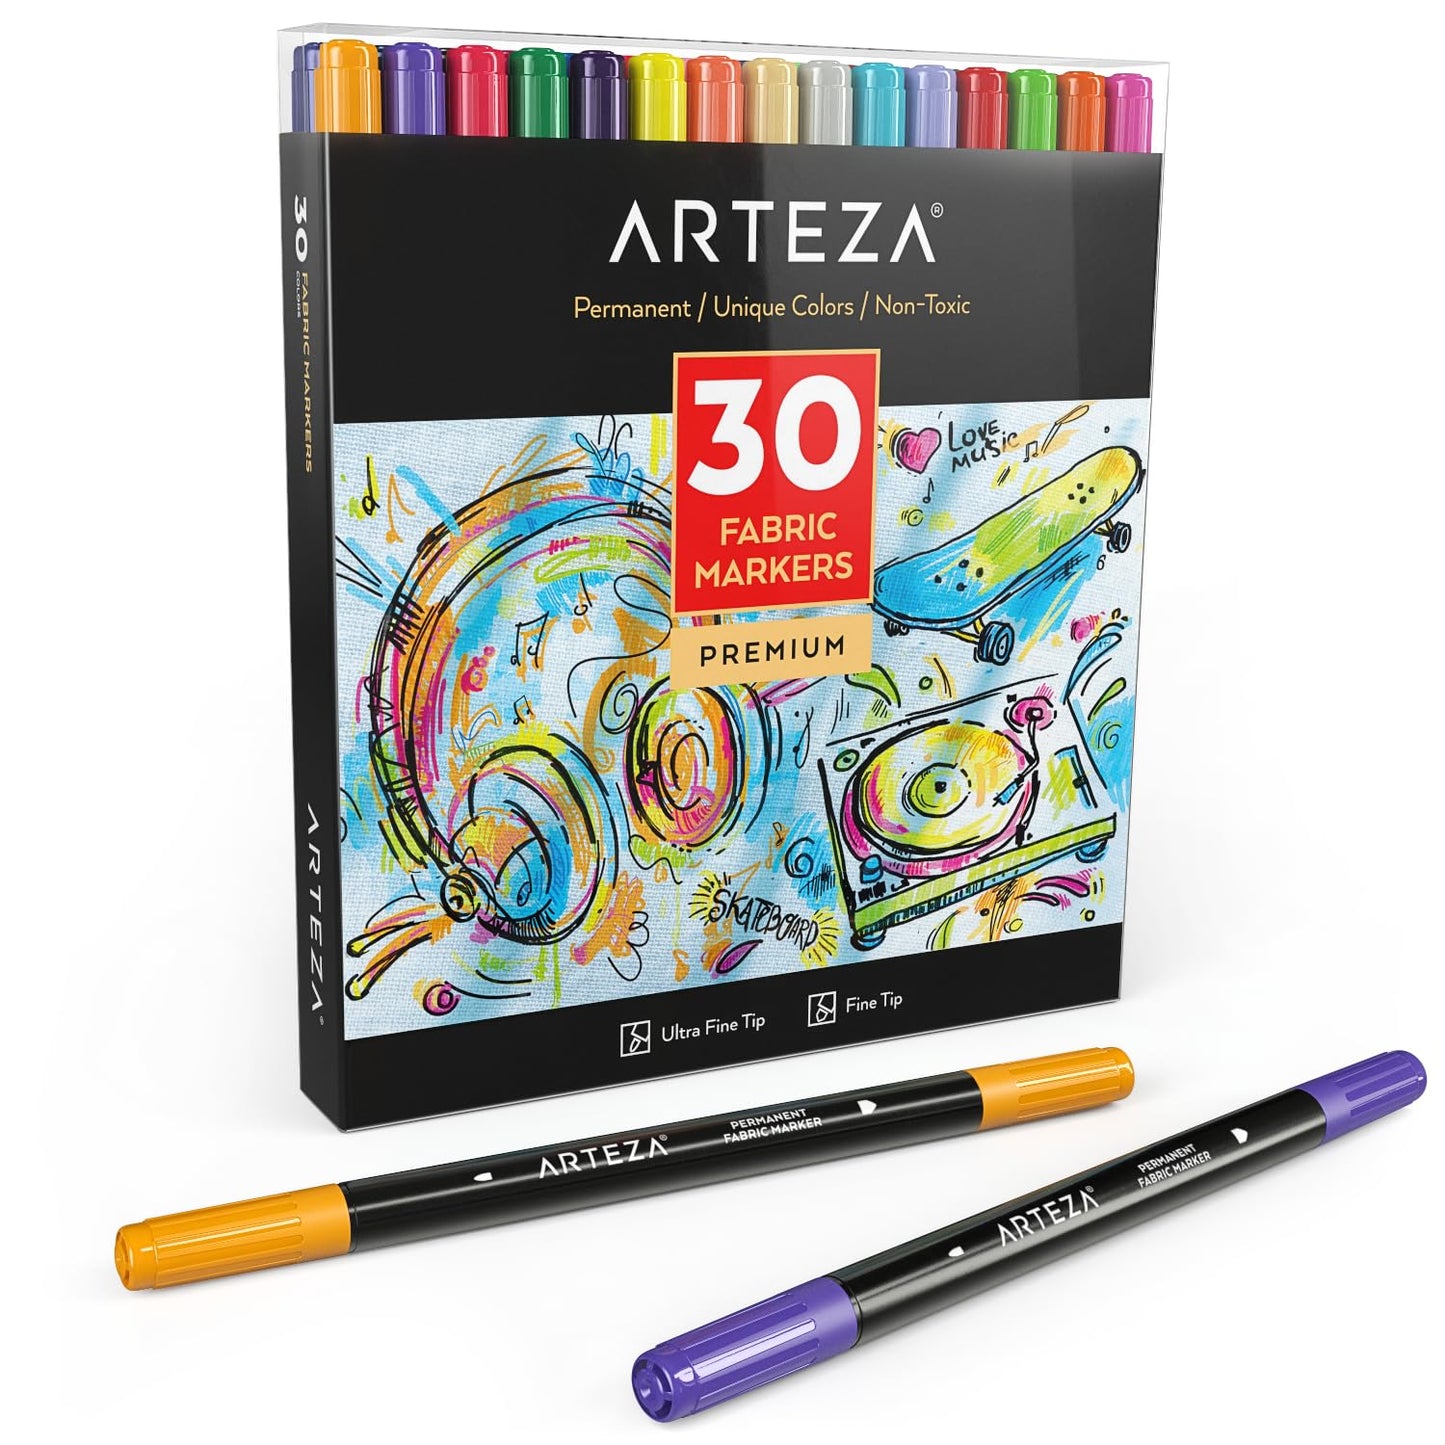 ARTEZA Fabric Paint Markers, Set of 30, Permanent Dual-Tip Textile Marker, Assorted Colors, Art Supplies for Coloring T-Shirts, Jeans, Jackets, and